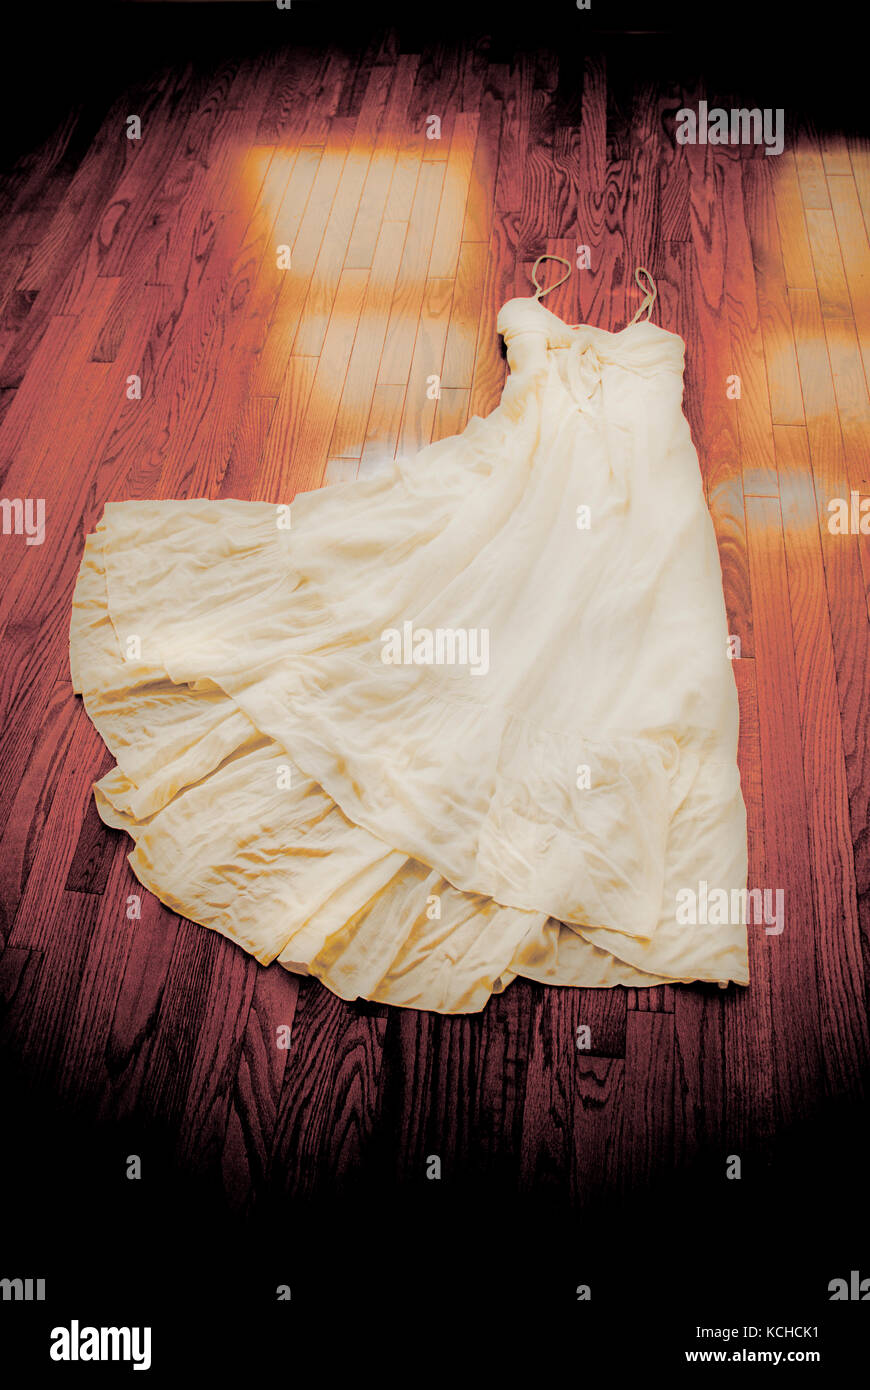 white dress on a wooden floor Stock Photo